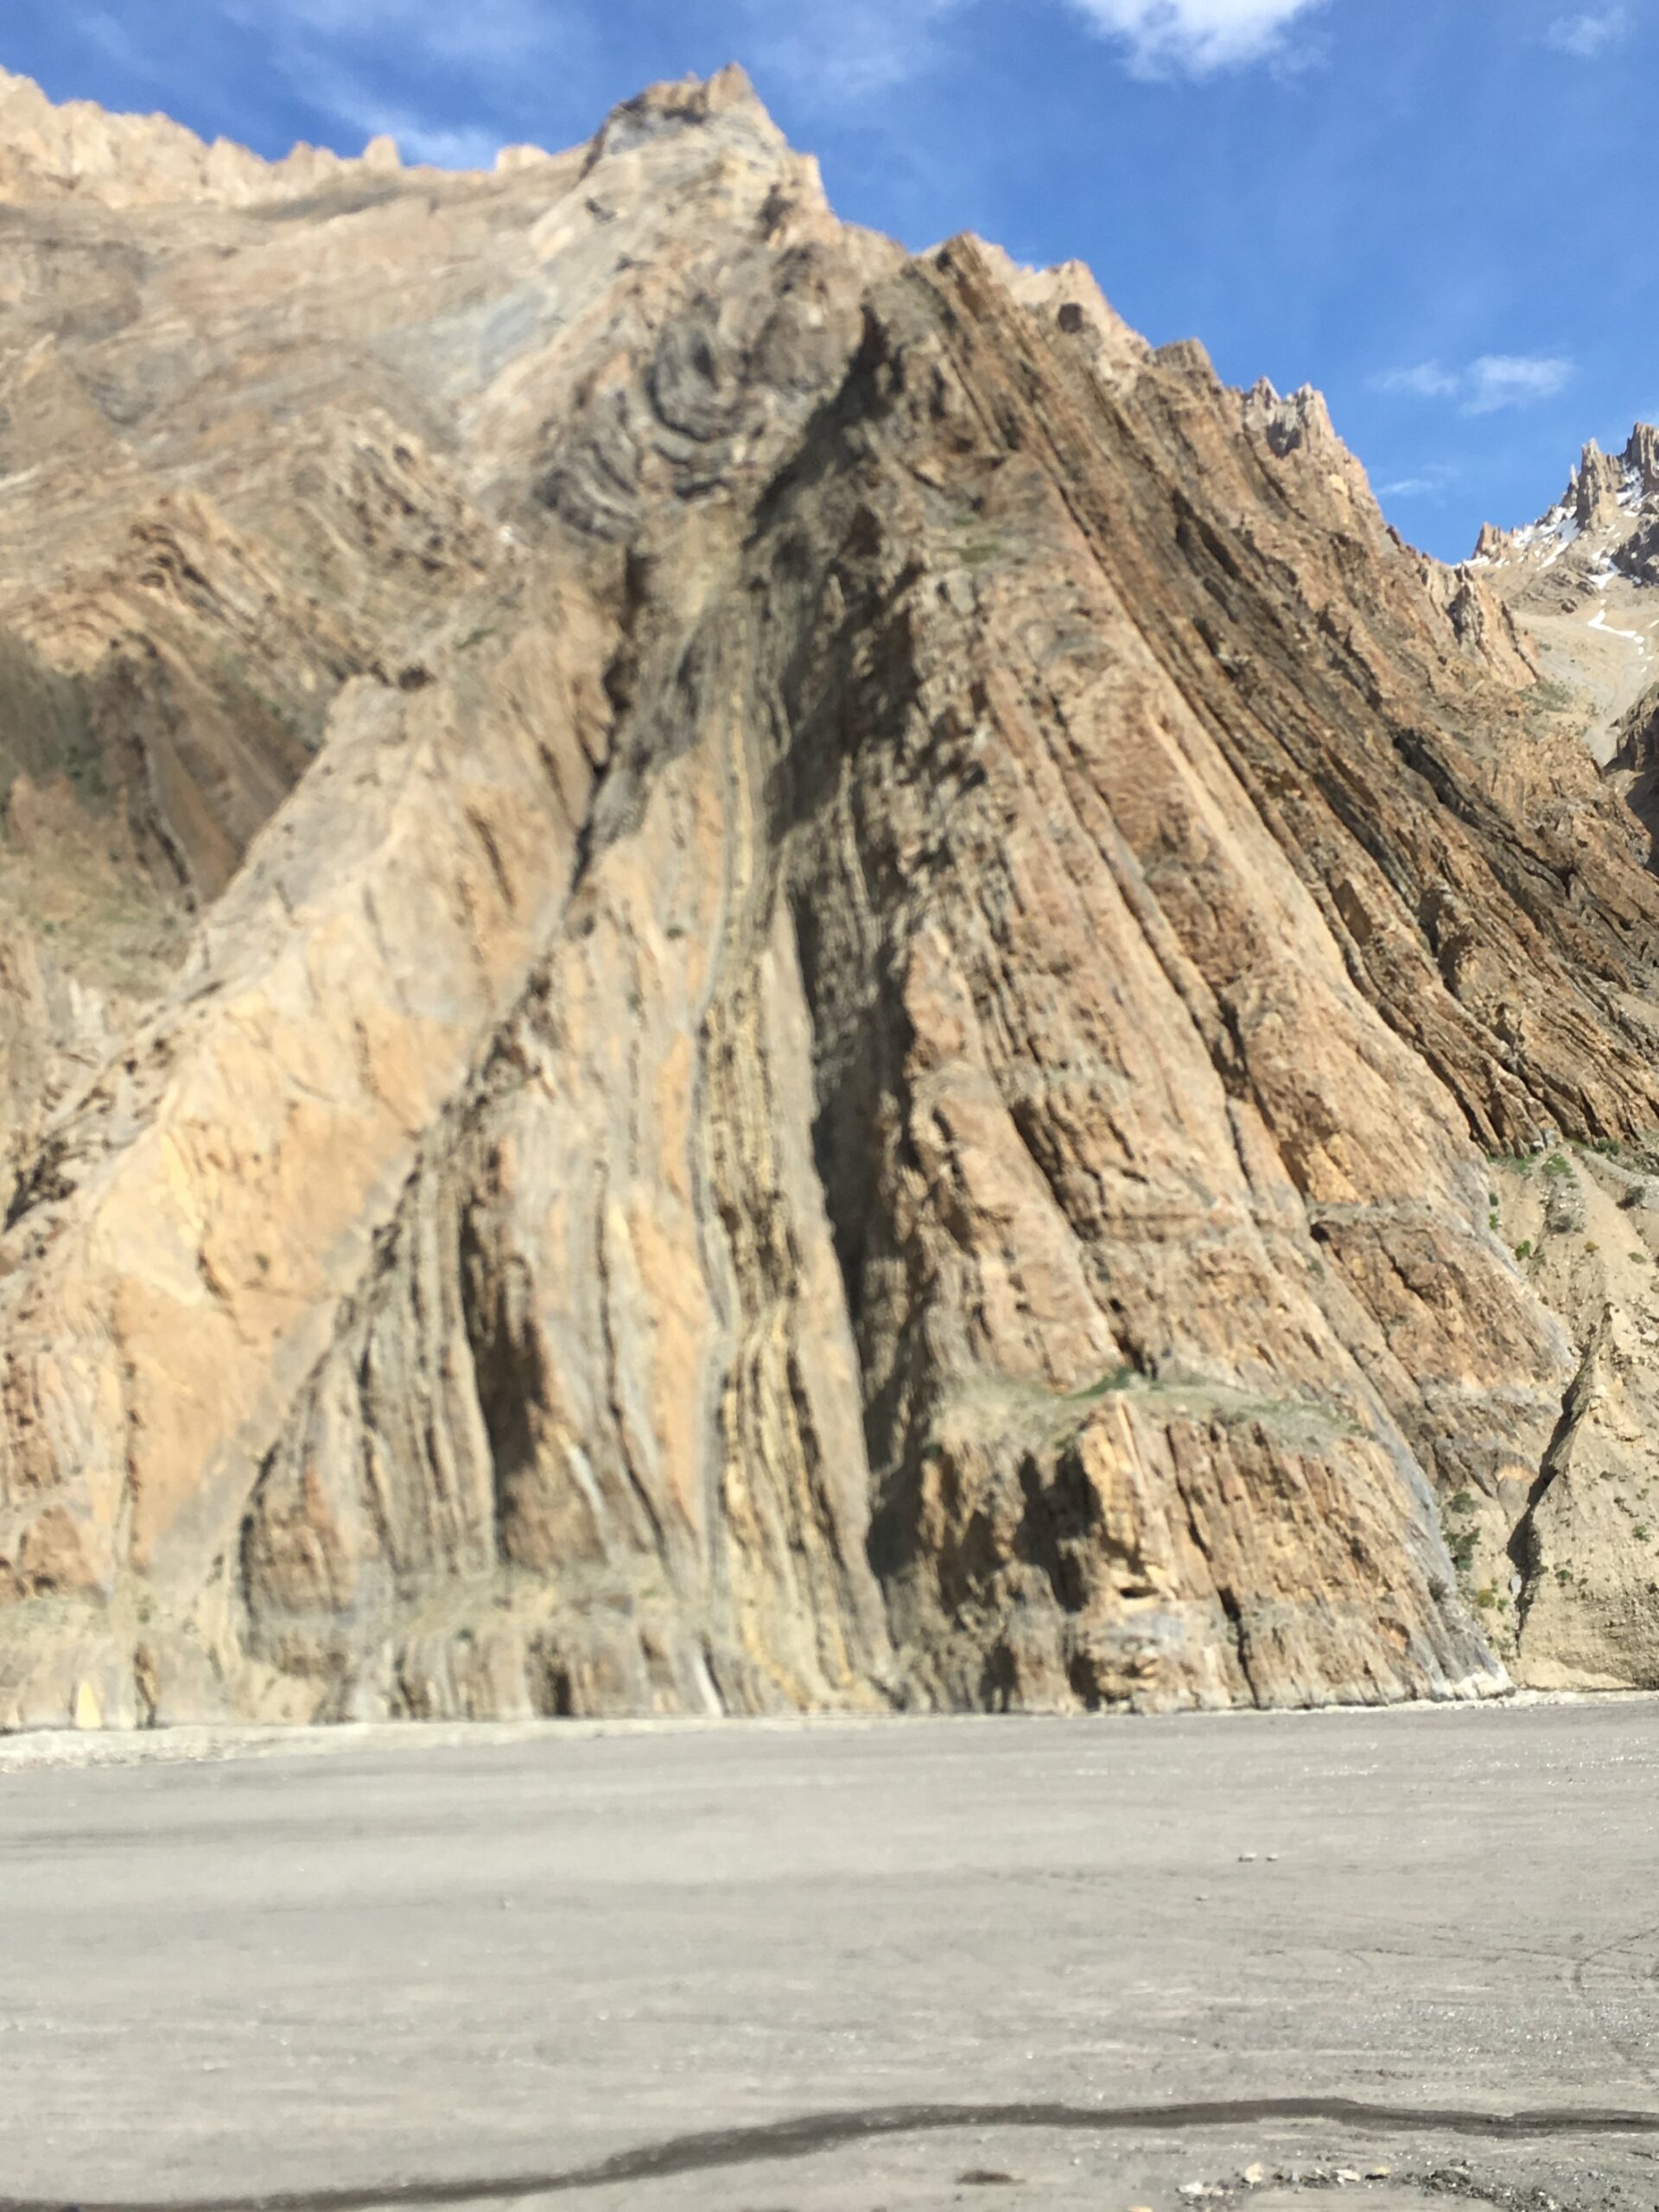 The Highest Ground - An 8-day Lahaul-Spiti Experience Part 2 - Nils Around The World